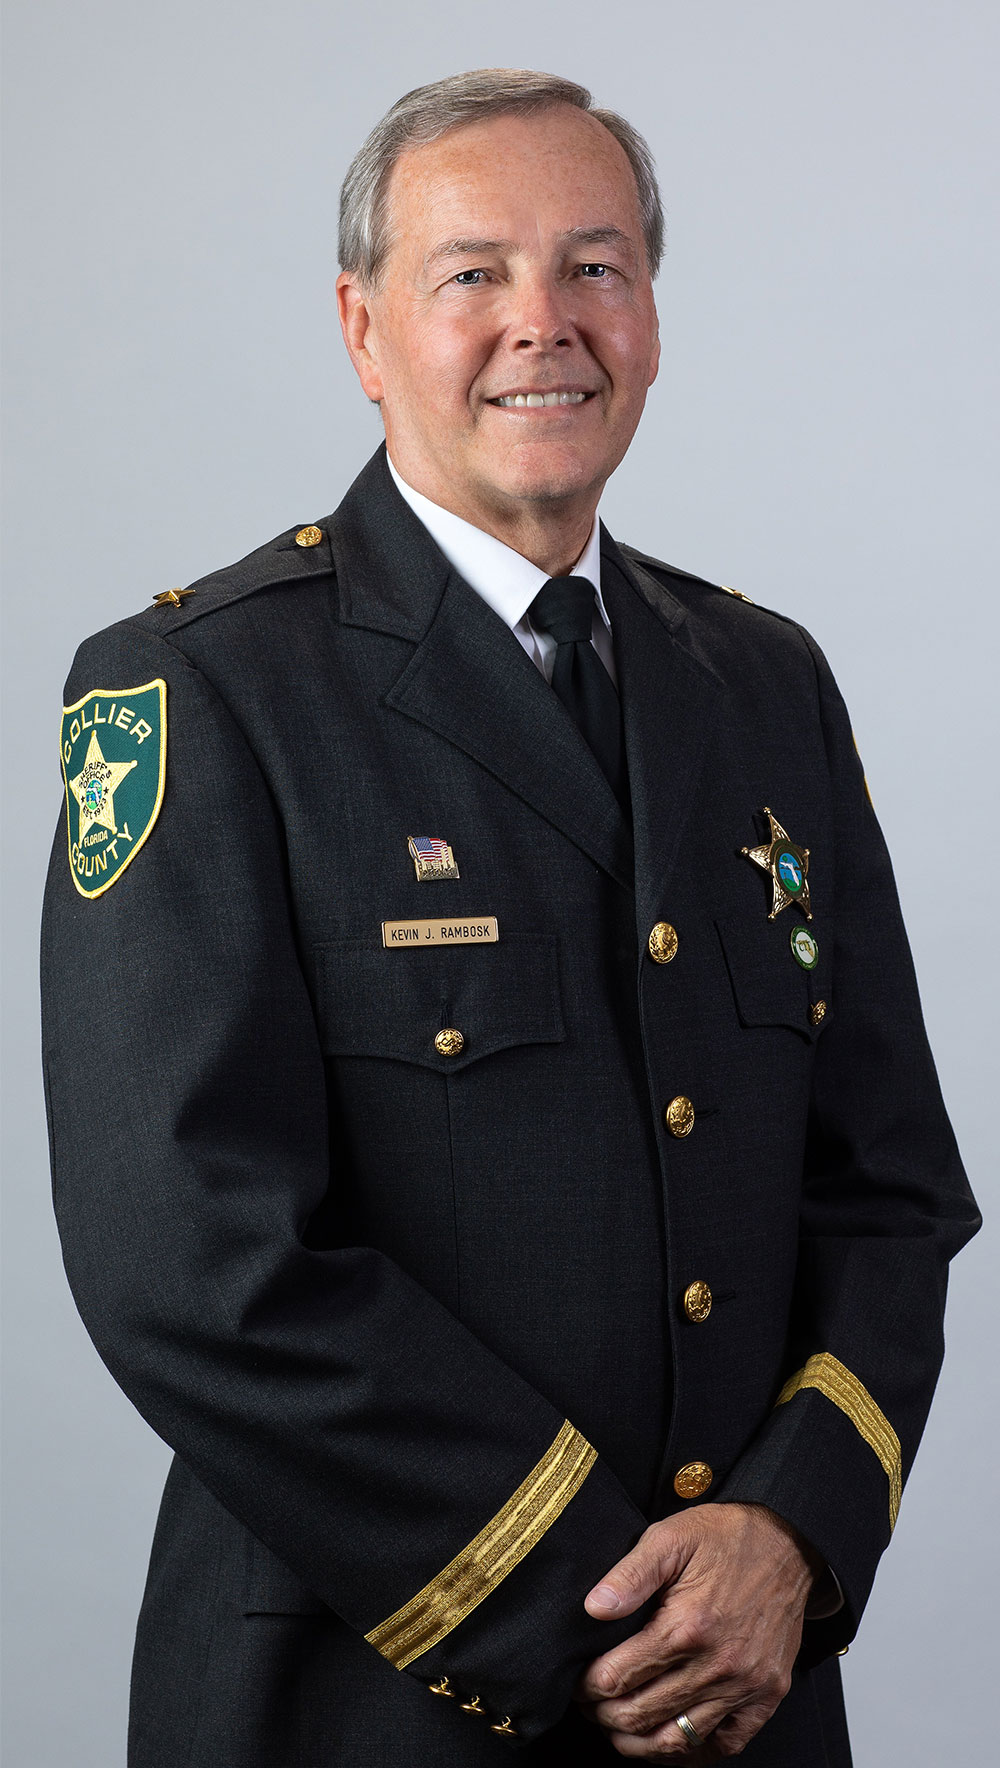 Photo of Collier County Sheriff Kevin J. Rambosk